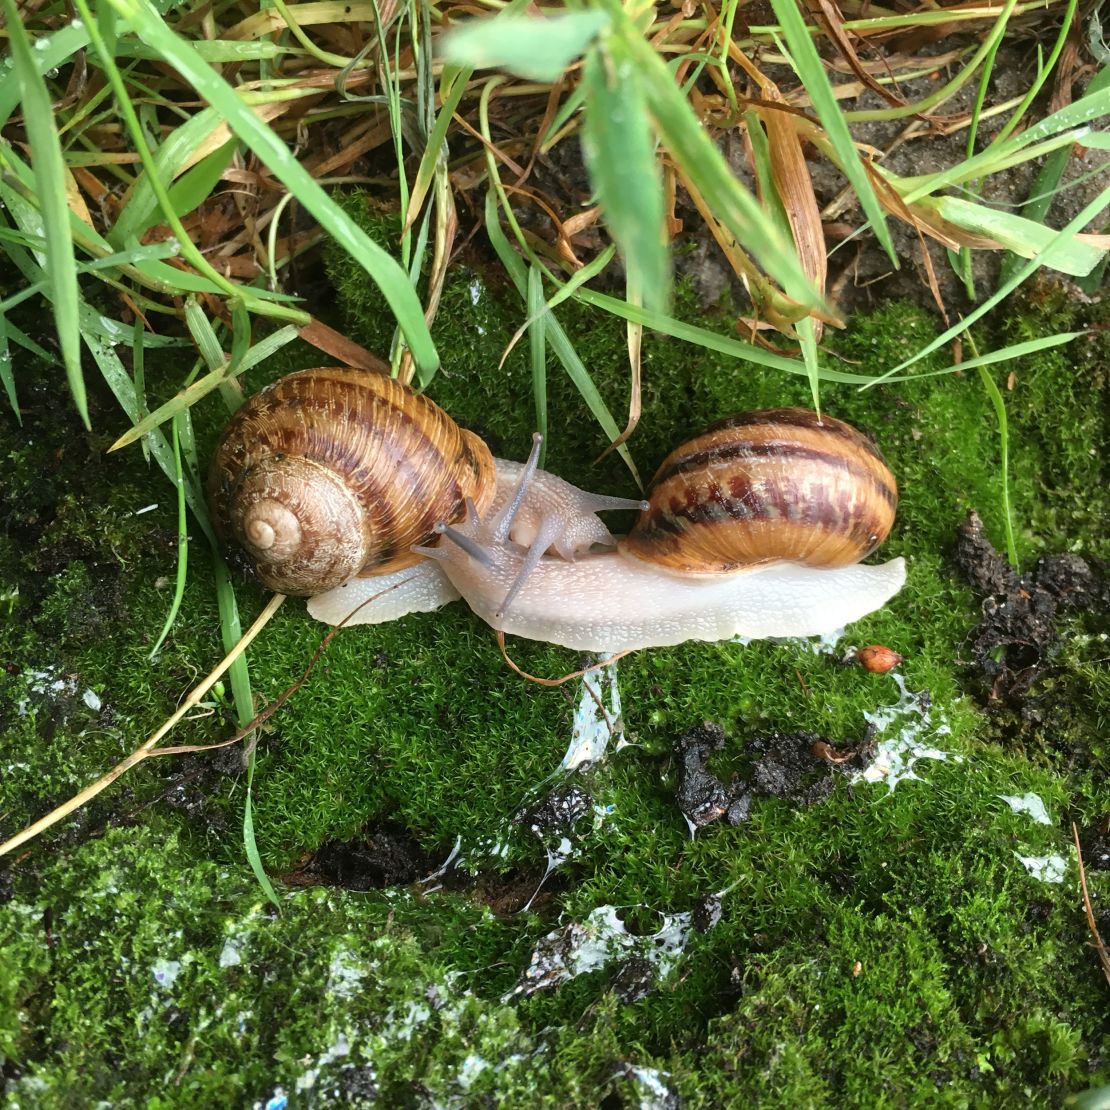 For snails, sex is not a simple male-female binary.